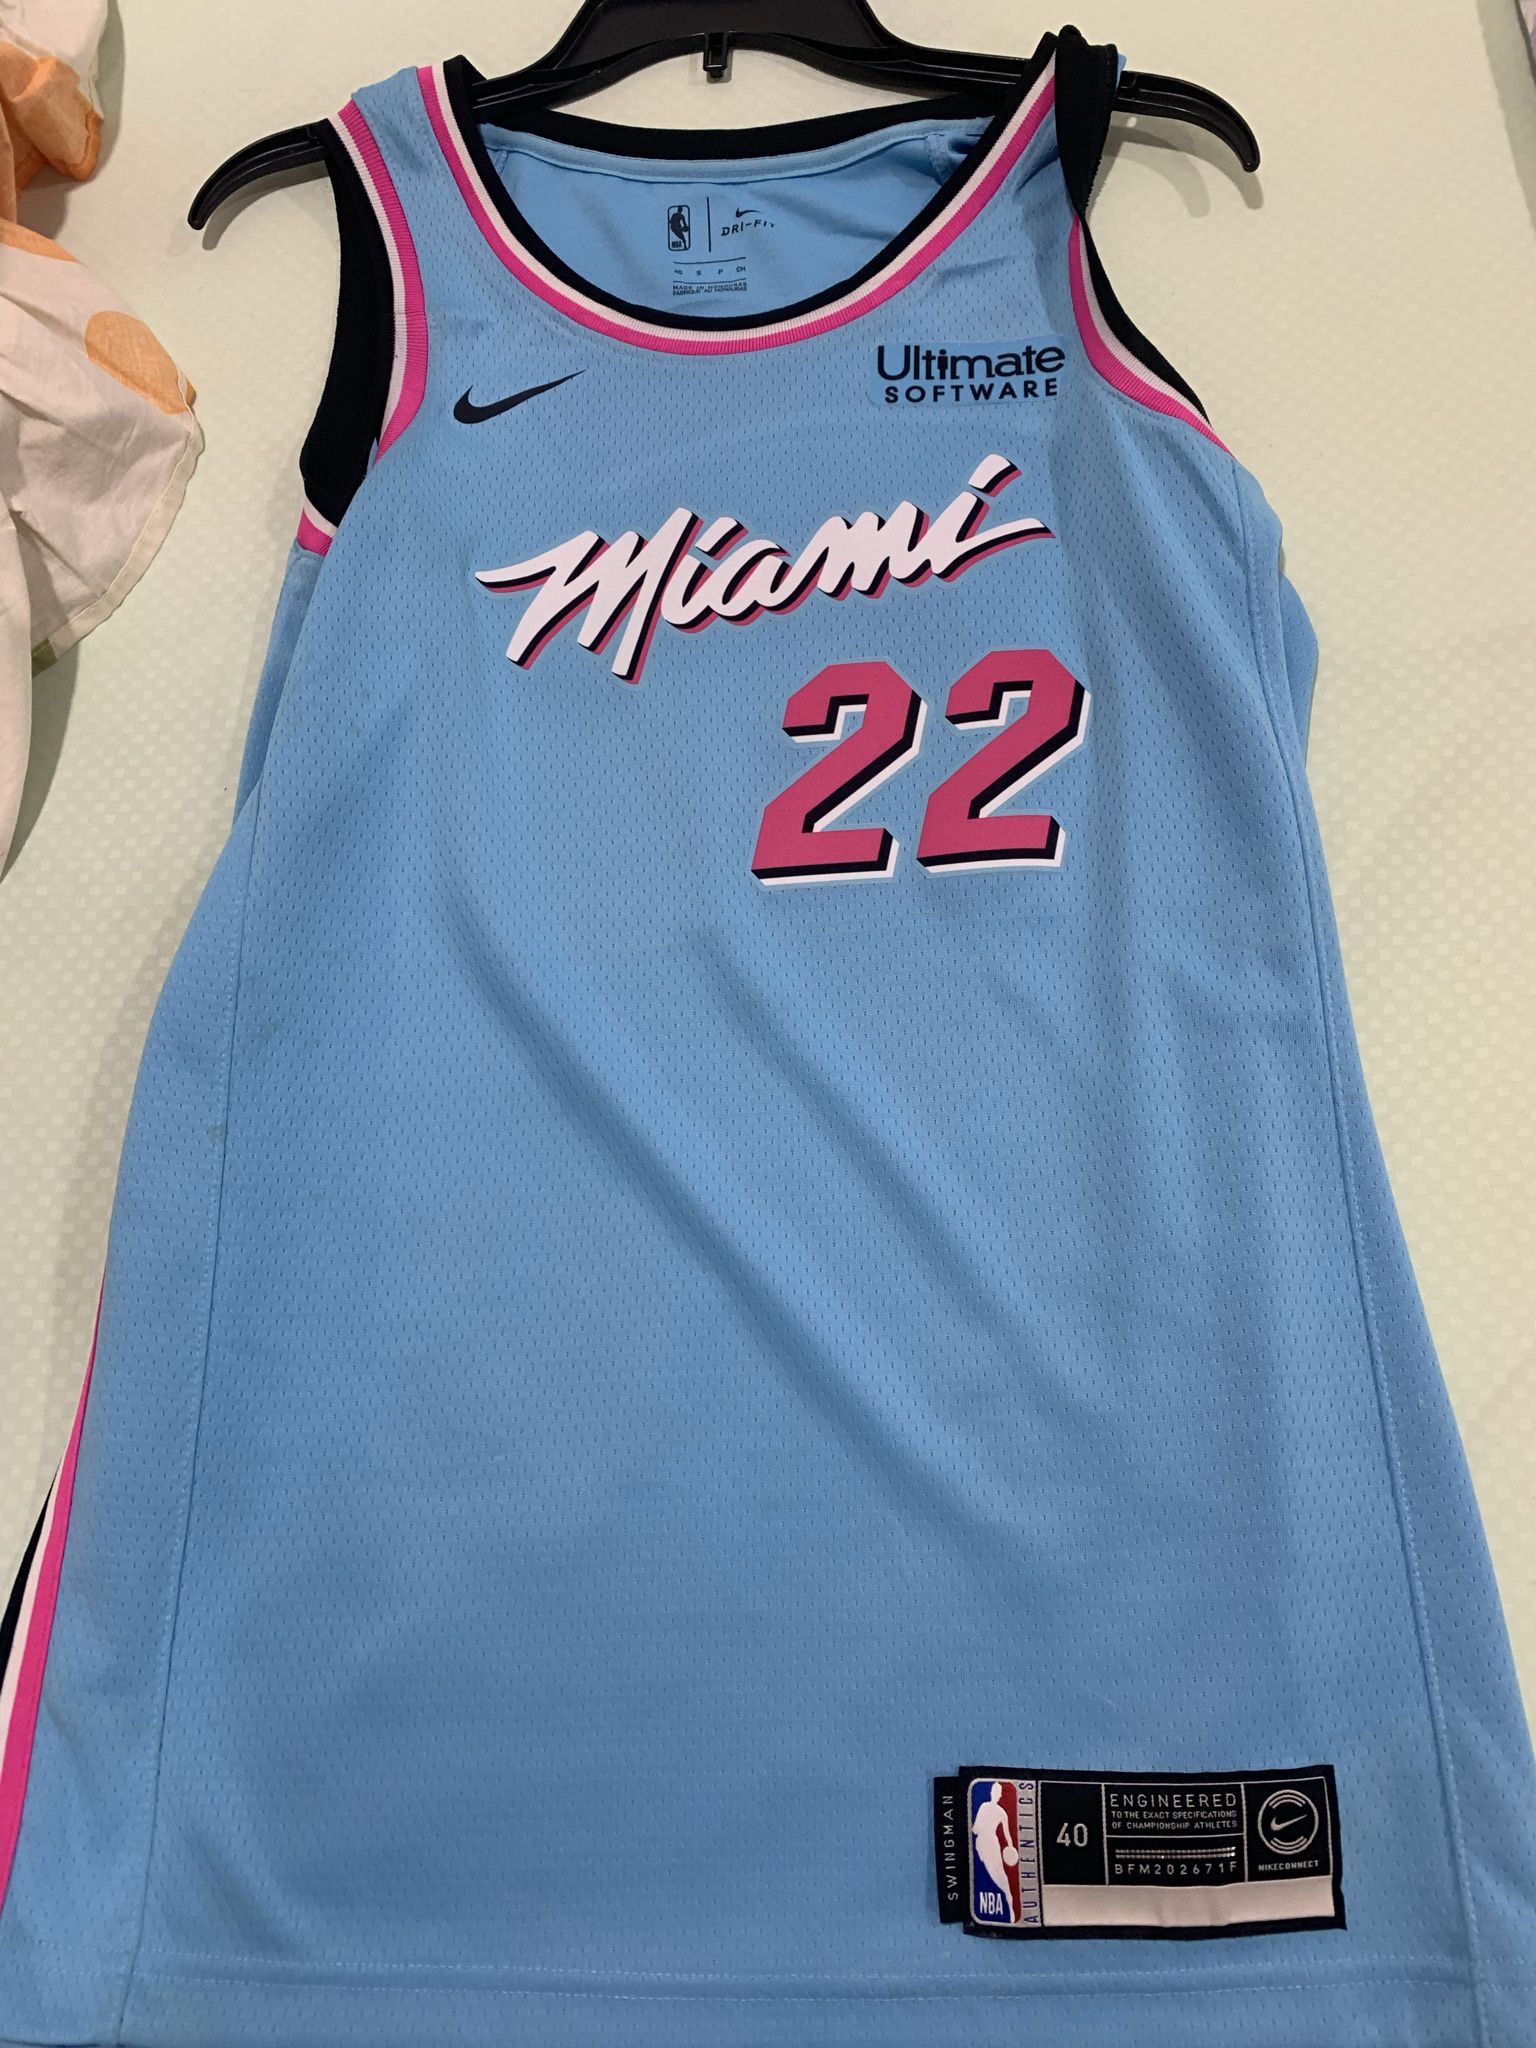 Mens Small Miami Heat Jersey for Sale in Hialeah, FL - OfferUp